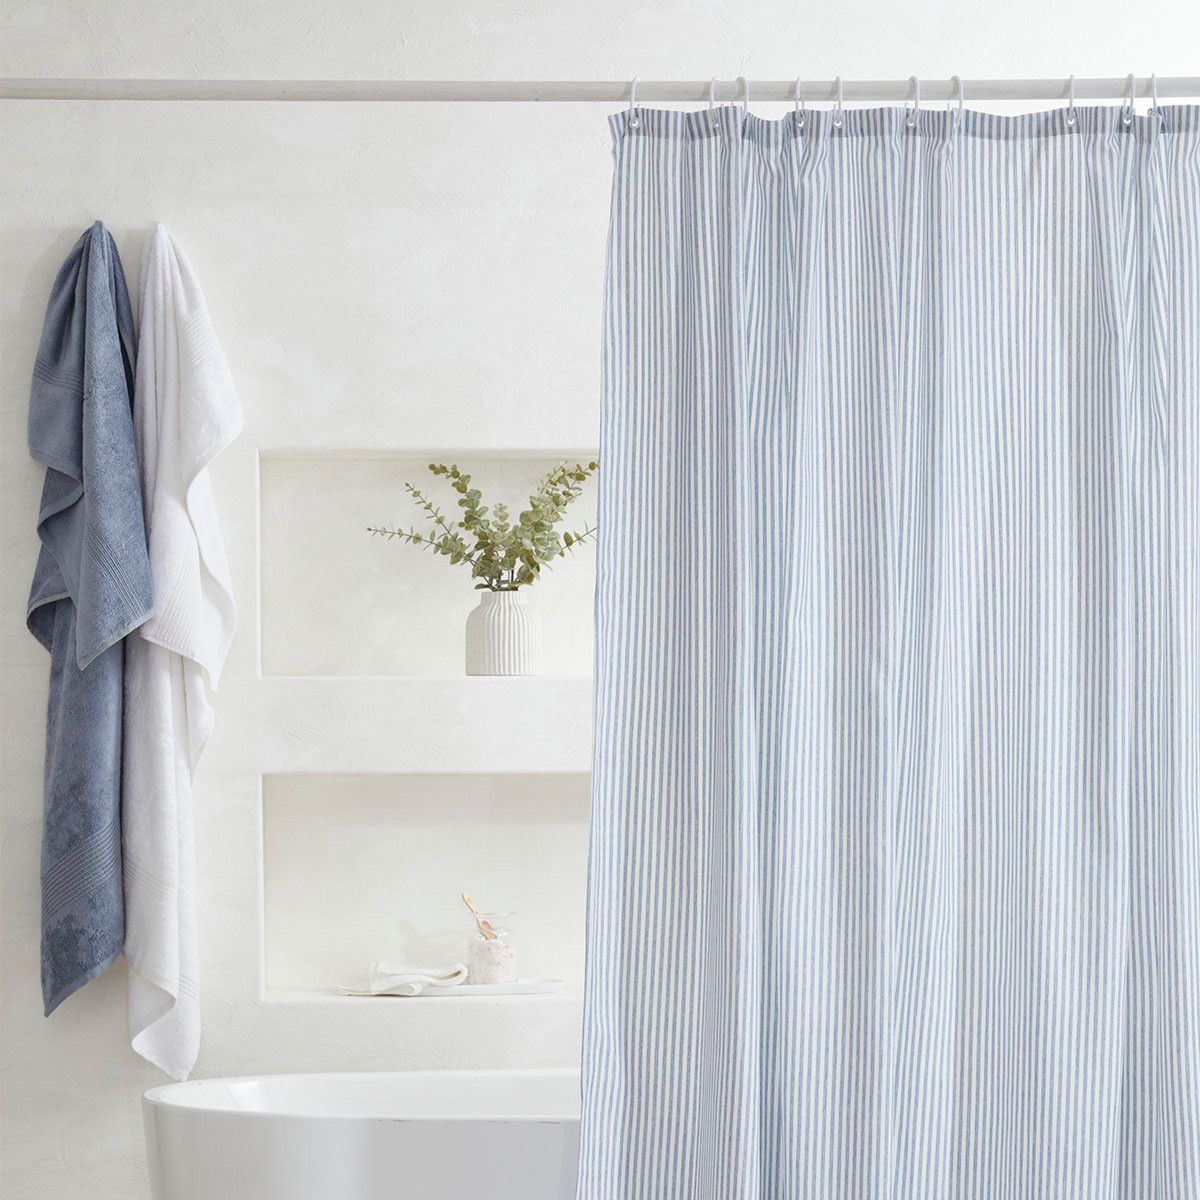 Add a touch of nautical style to your bathroom with a blue and white striped shower curtain